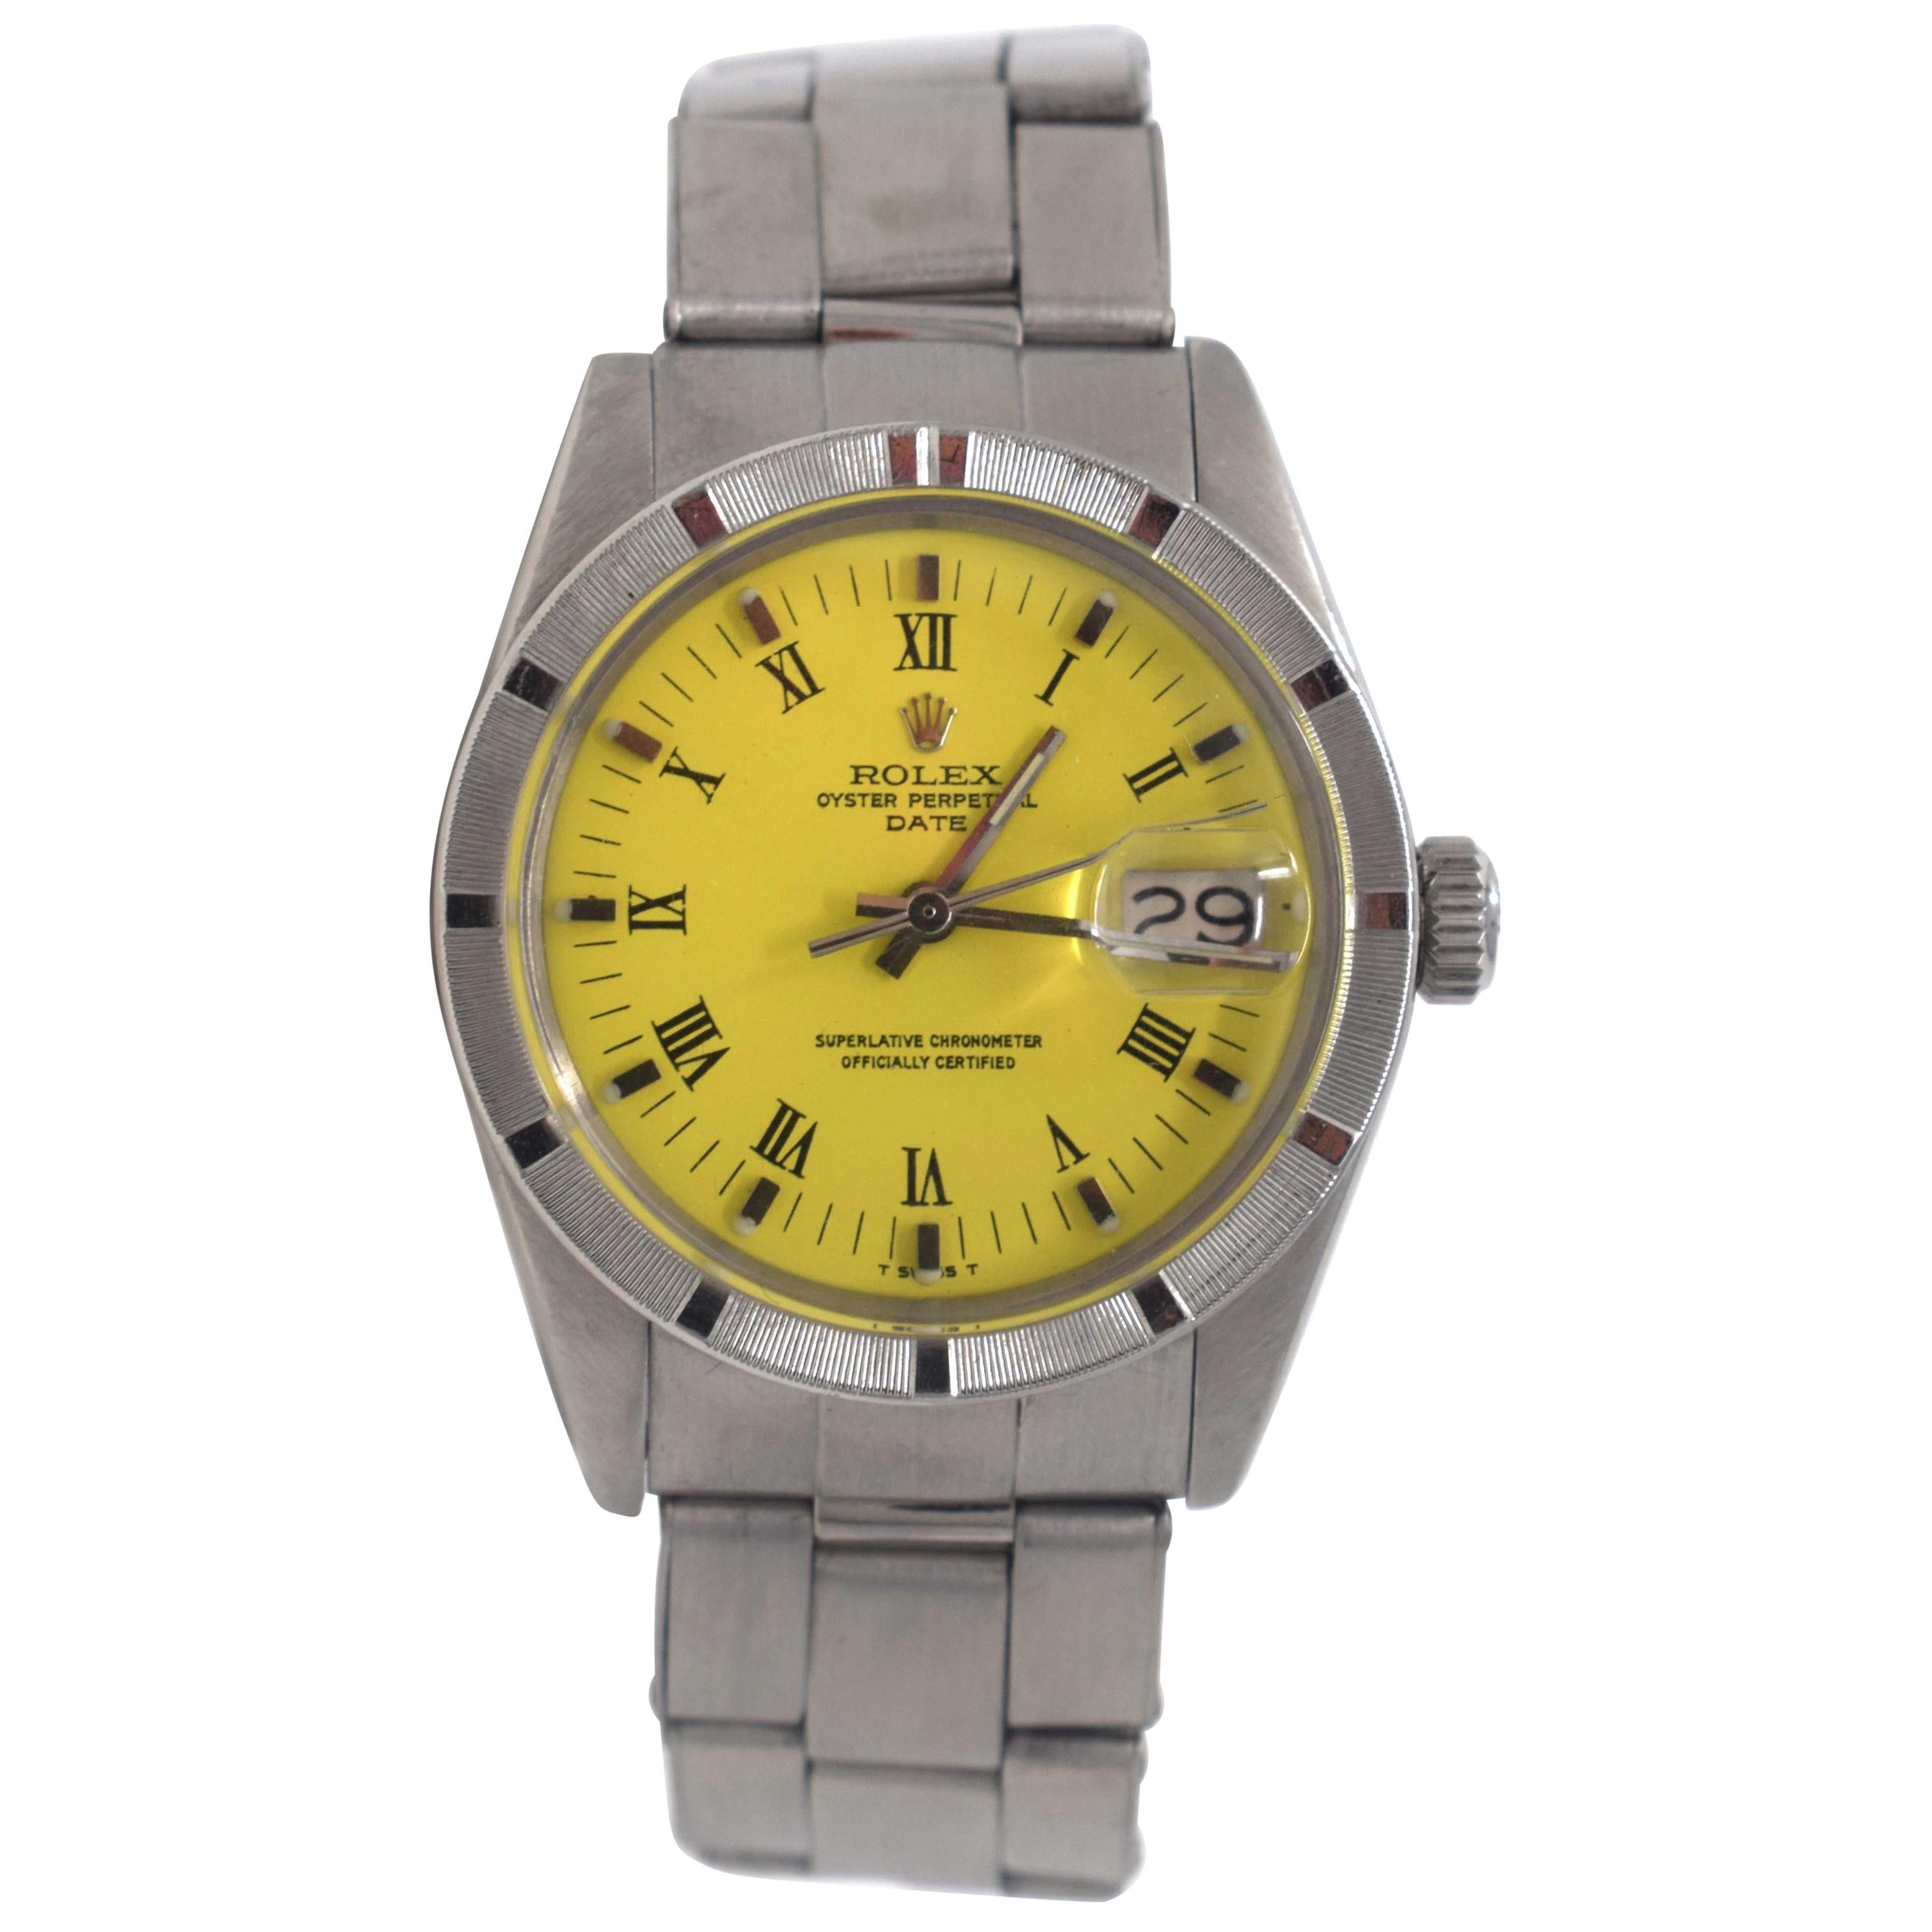 Vintage Rolex Date Ref. 1501 Steel Oyster Perpetual Yellow Dial Watch 'R-30'